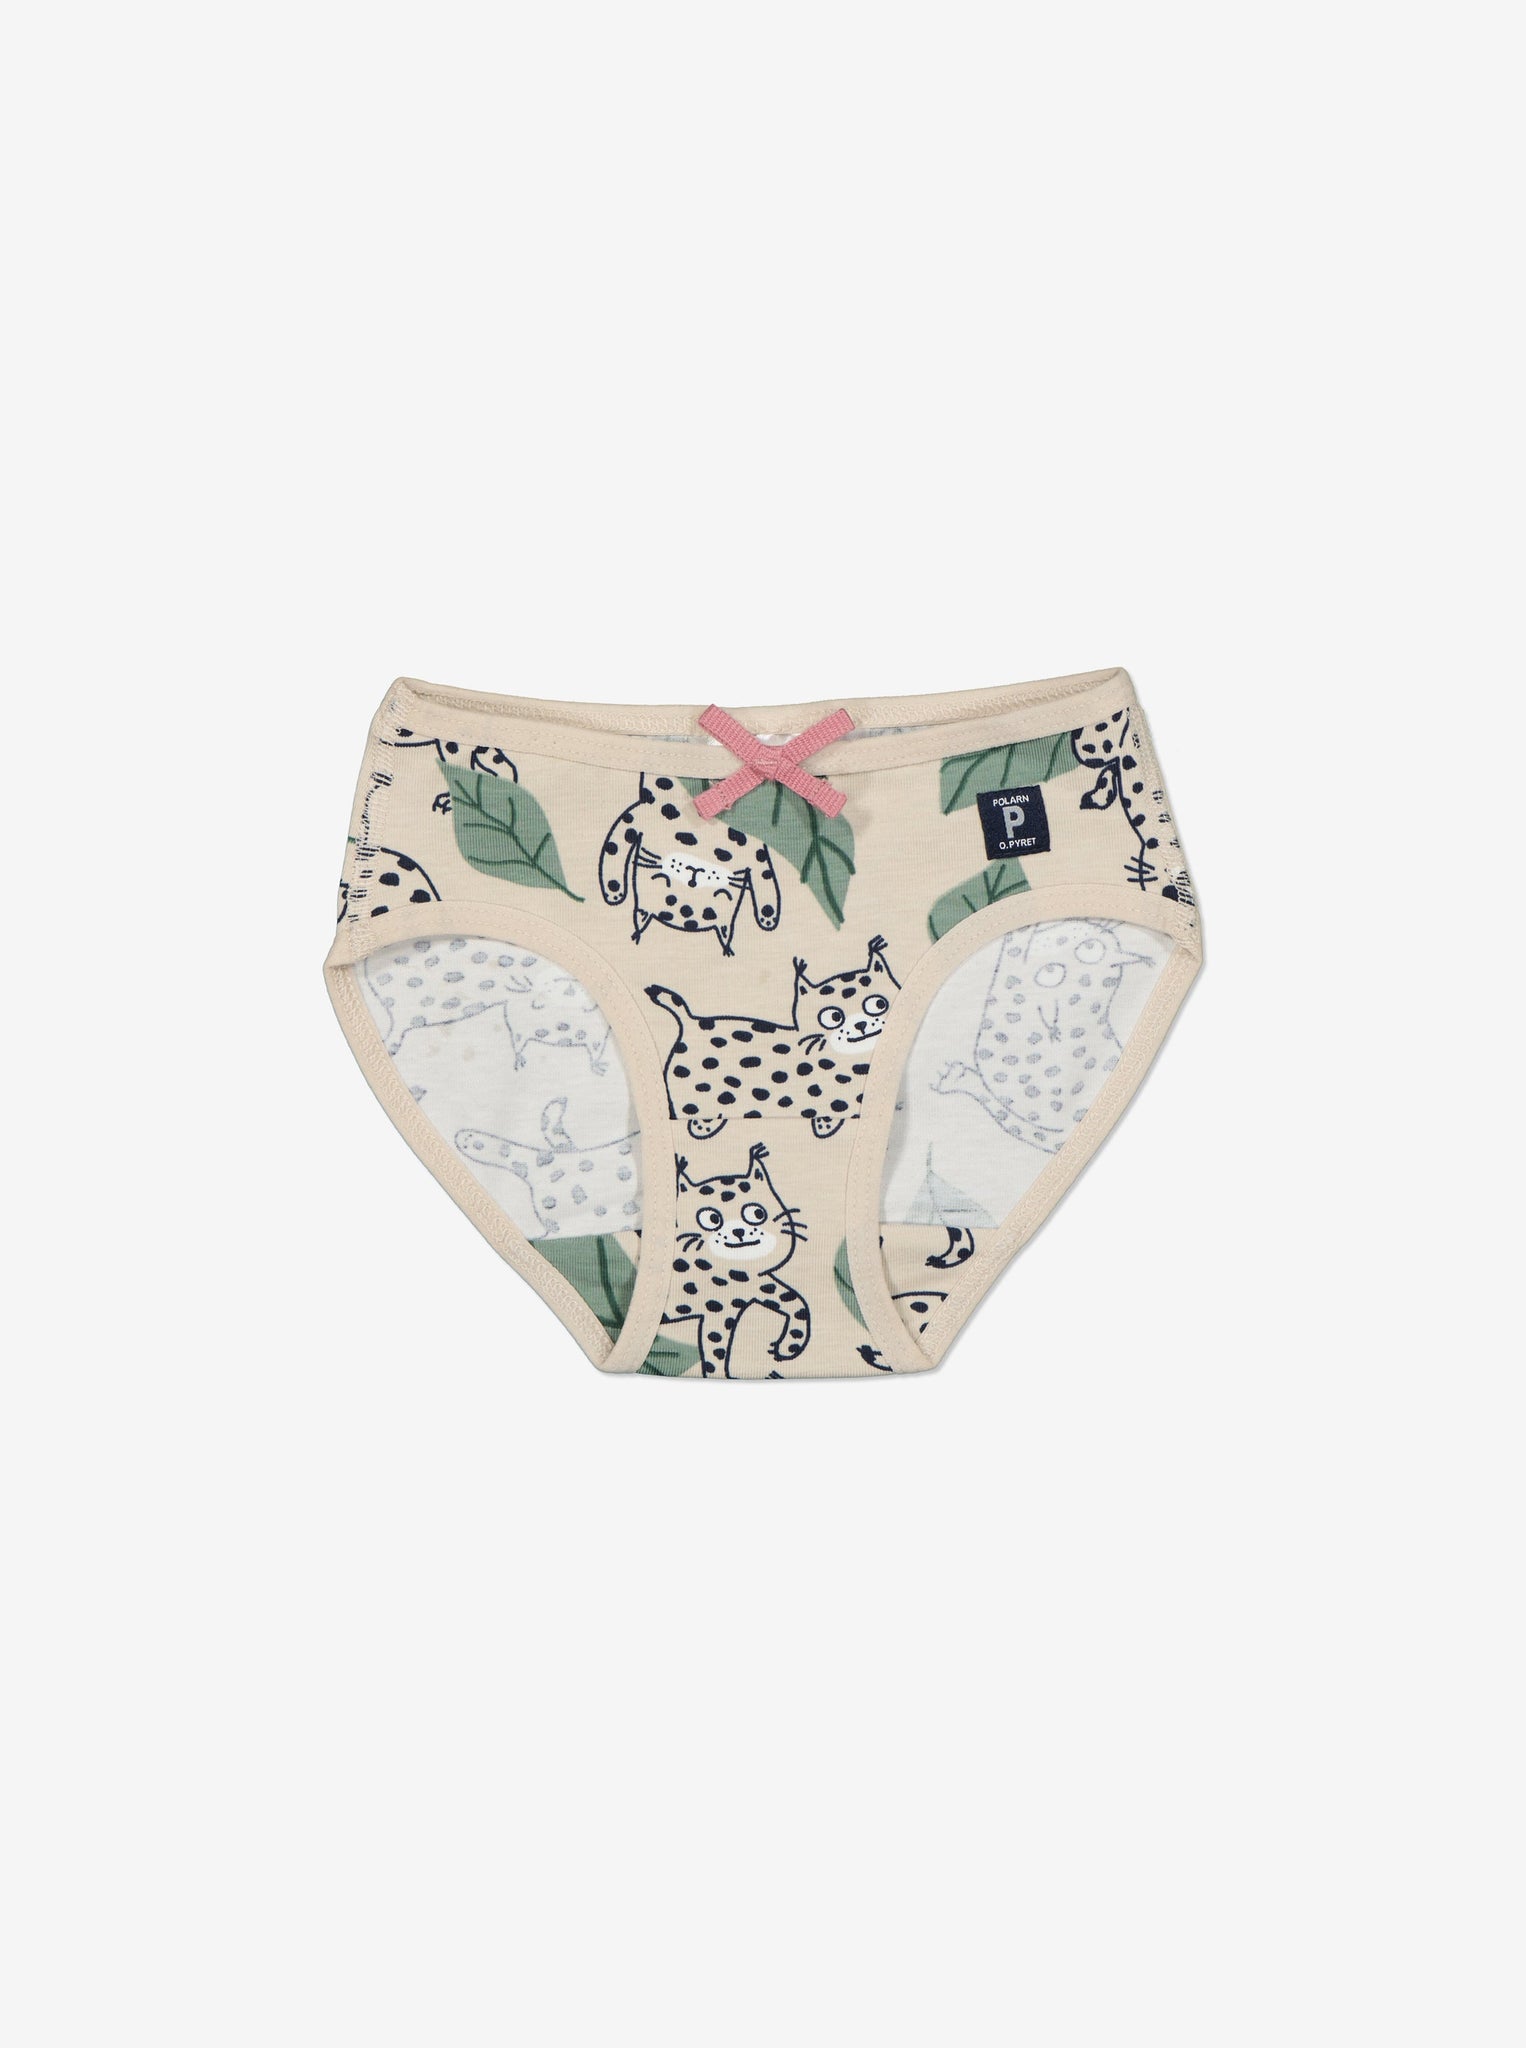 Organic Cotton Beige Girls Briefs from the Polarn O. Pyret Kidswear collection. Clothes made using sustainably sourced materials.